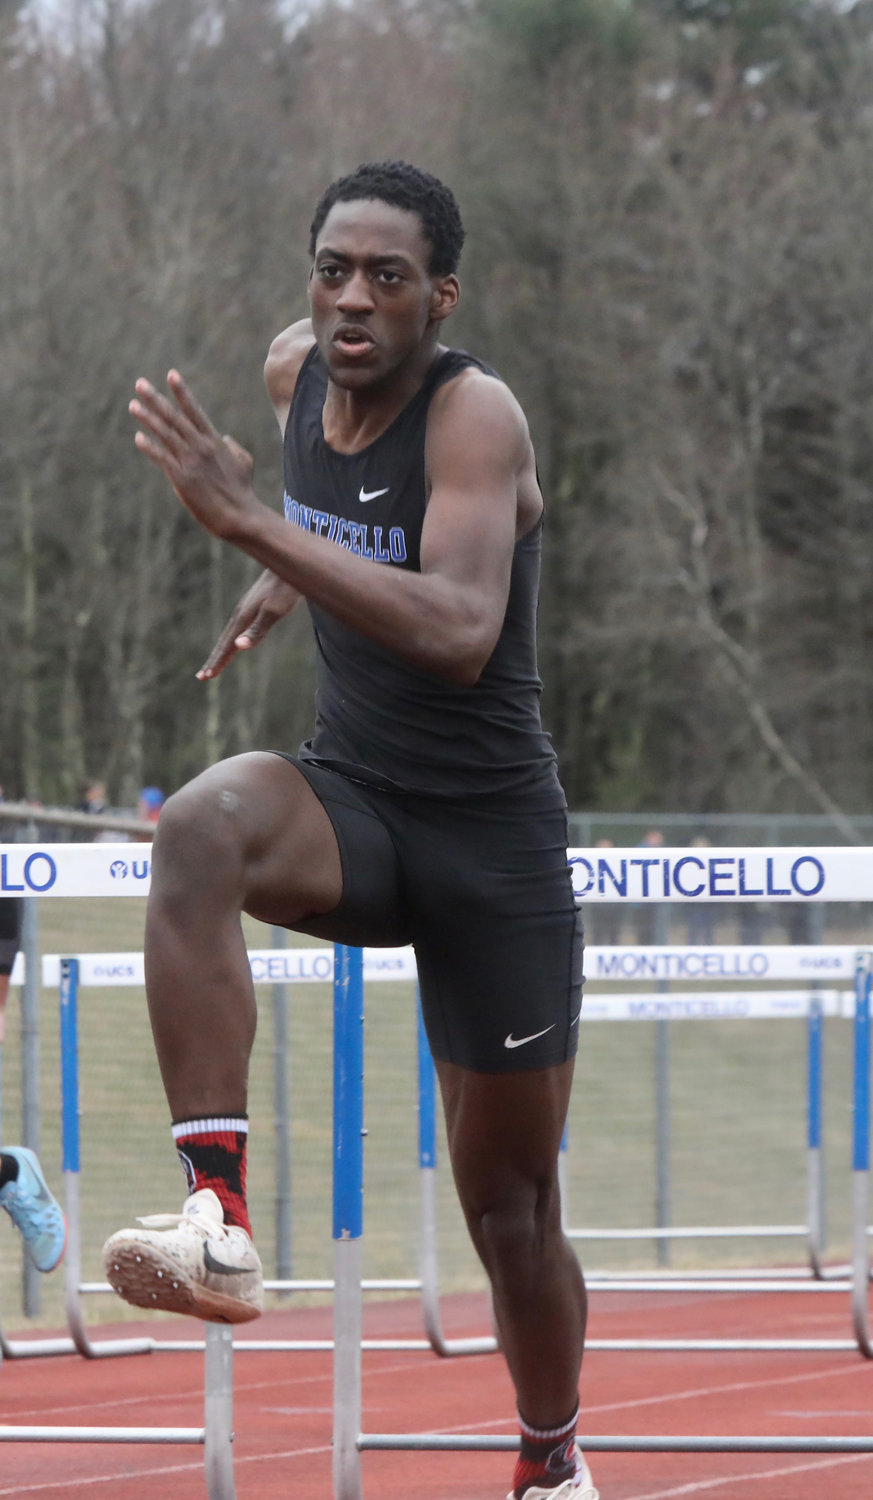 Monticello’s Tahir Denton, one of the premiere hurdlers in the county.